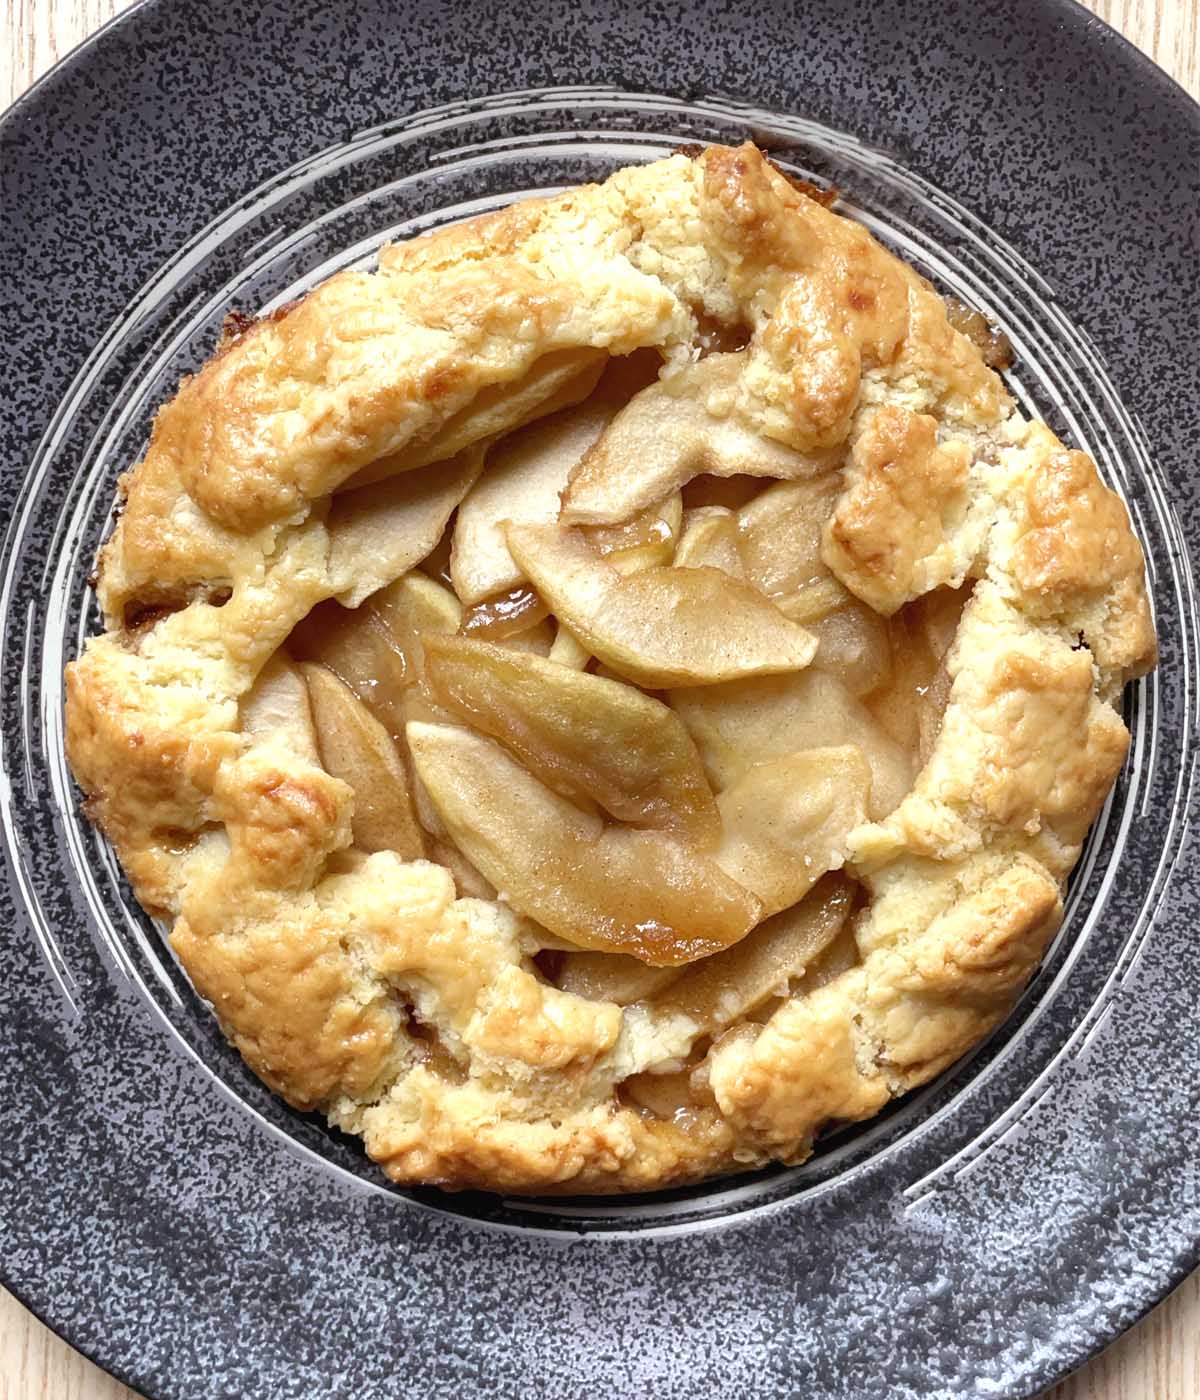 A baked apple galette with golden crust on a dark round plate.